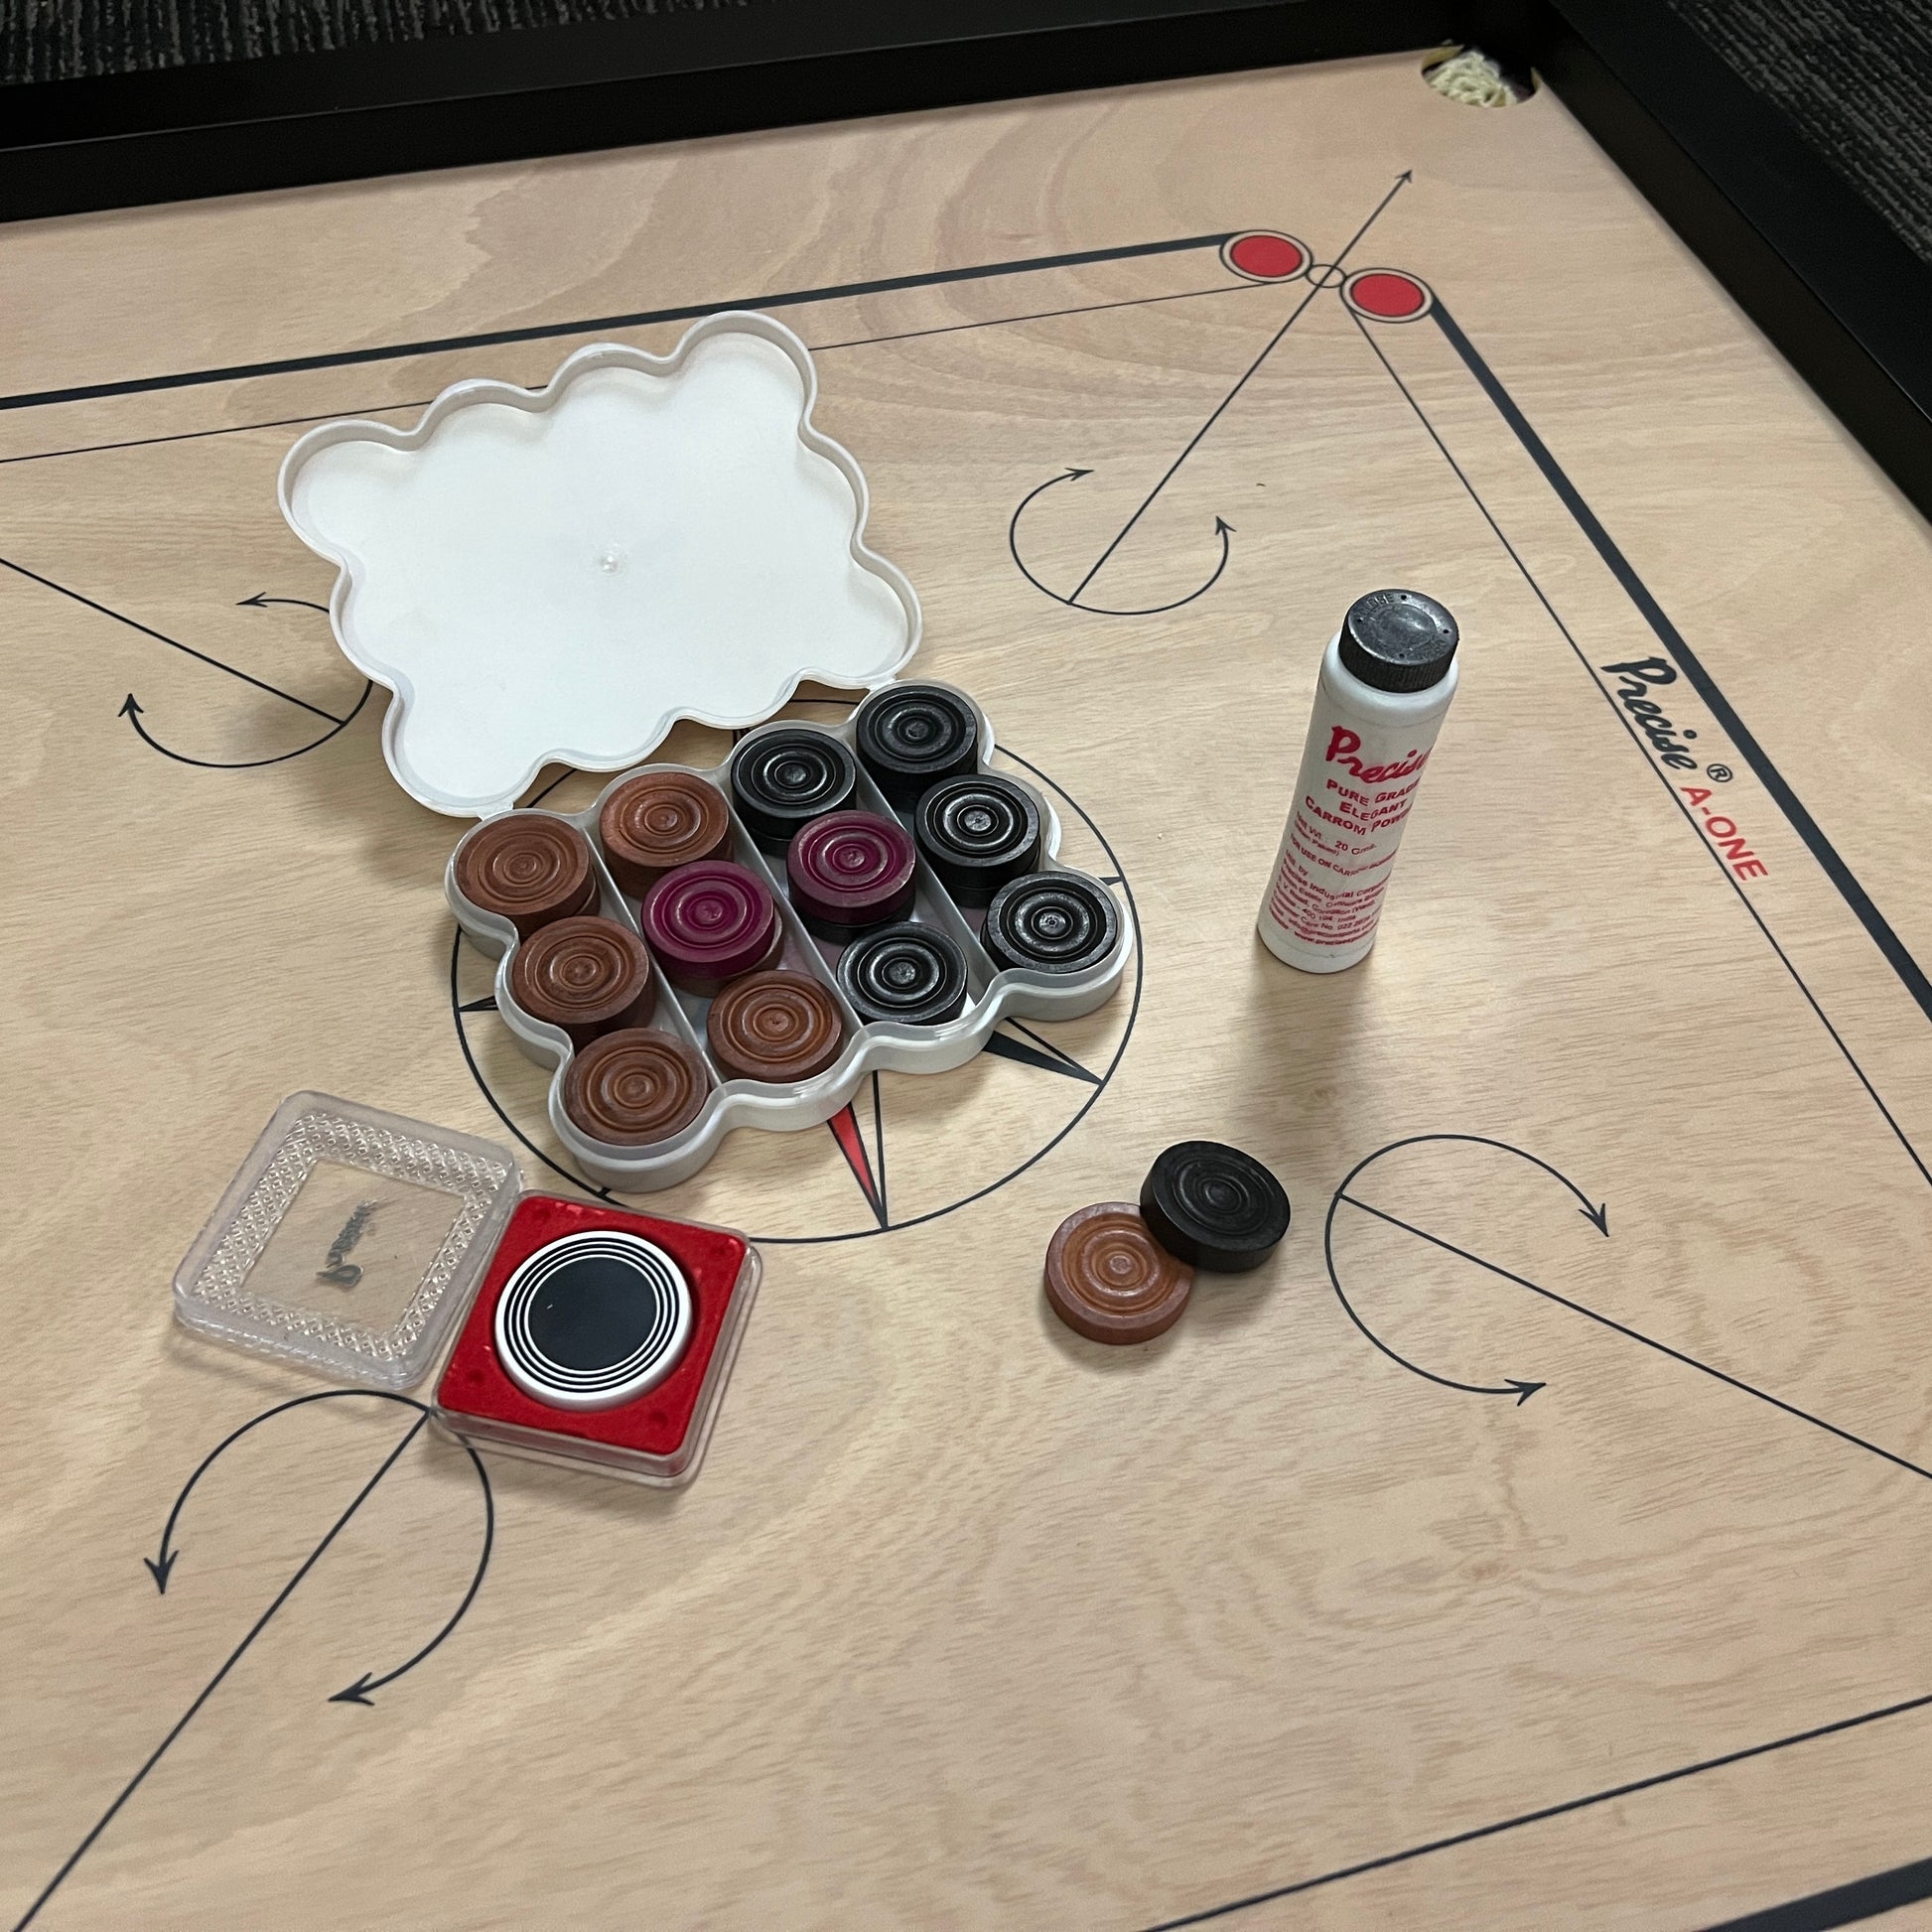 PRECISE Excel A-One carrom board with a 6mm thick special selected A-One waterproof ply, measuring 32x32 inches overall with a 29x29 inch playing area, 1.5-inch borders, and strong hand-knitted wool nets. Includes a striker and a set of coins, featuring plastic feet for elevation.